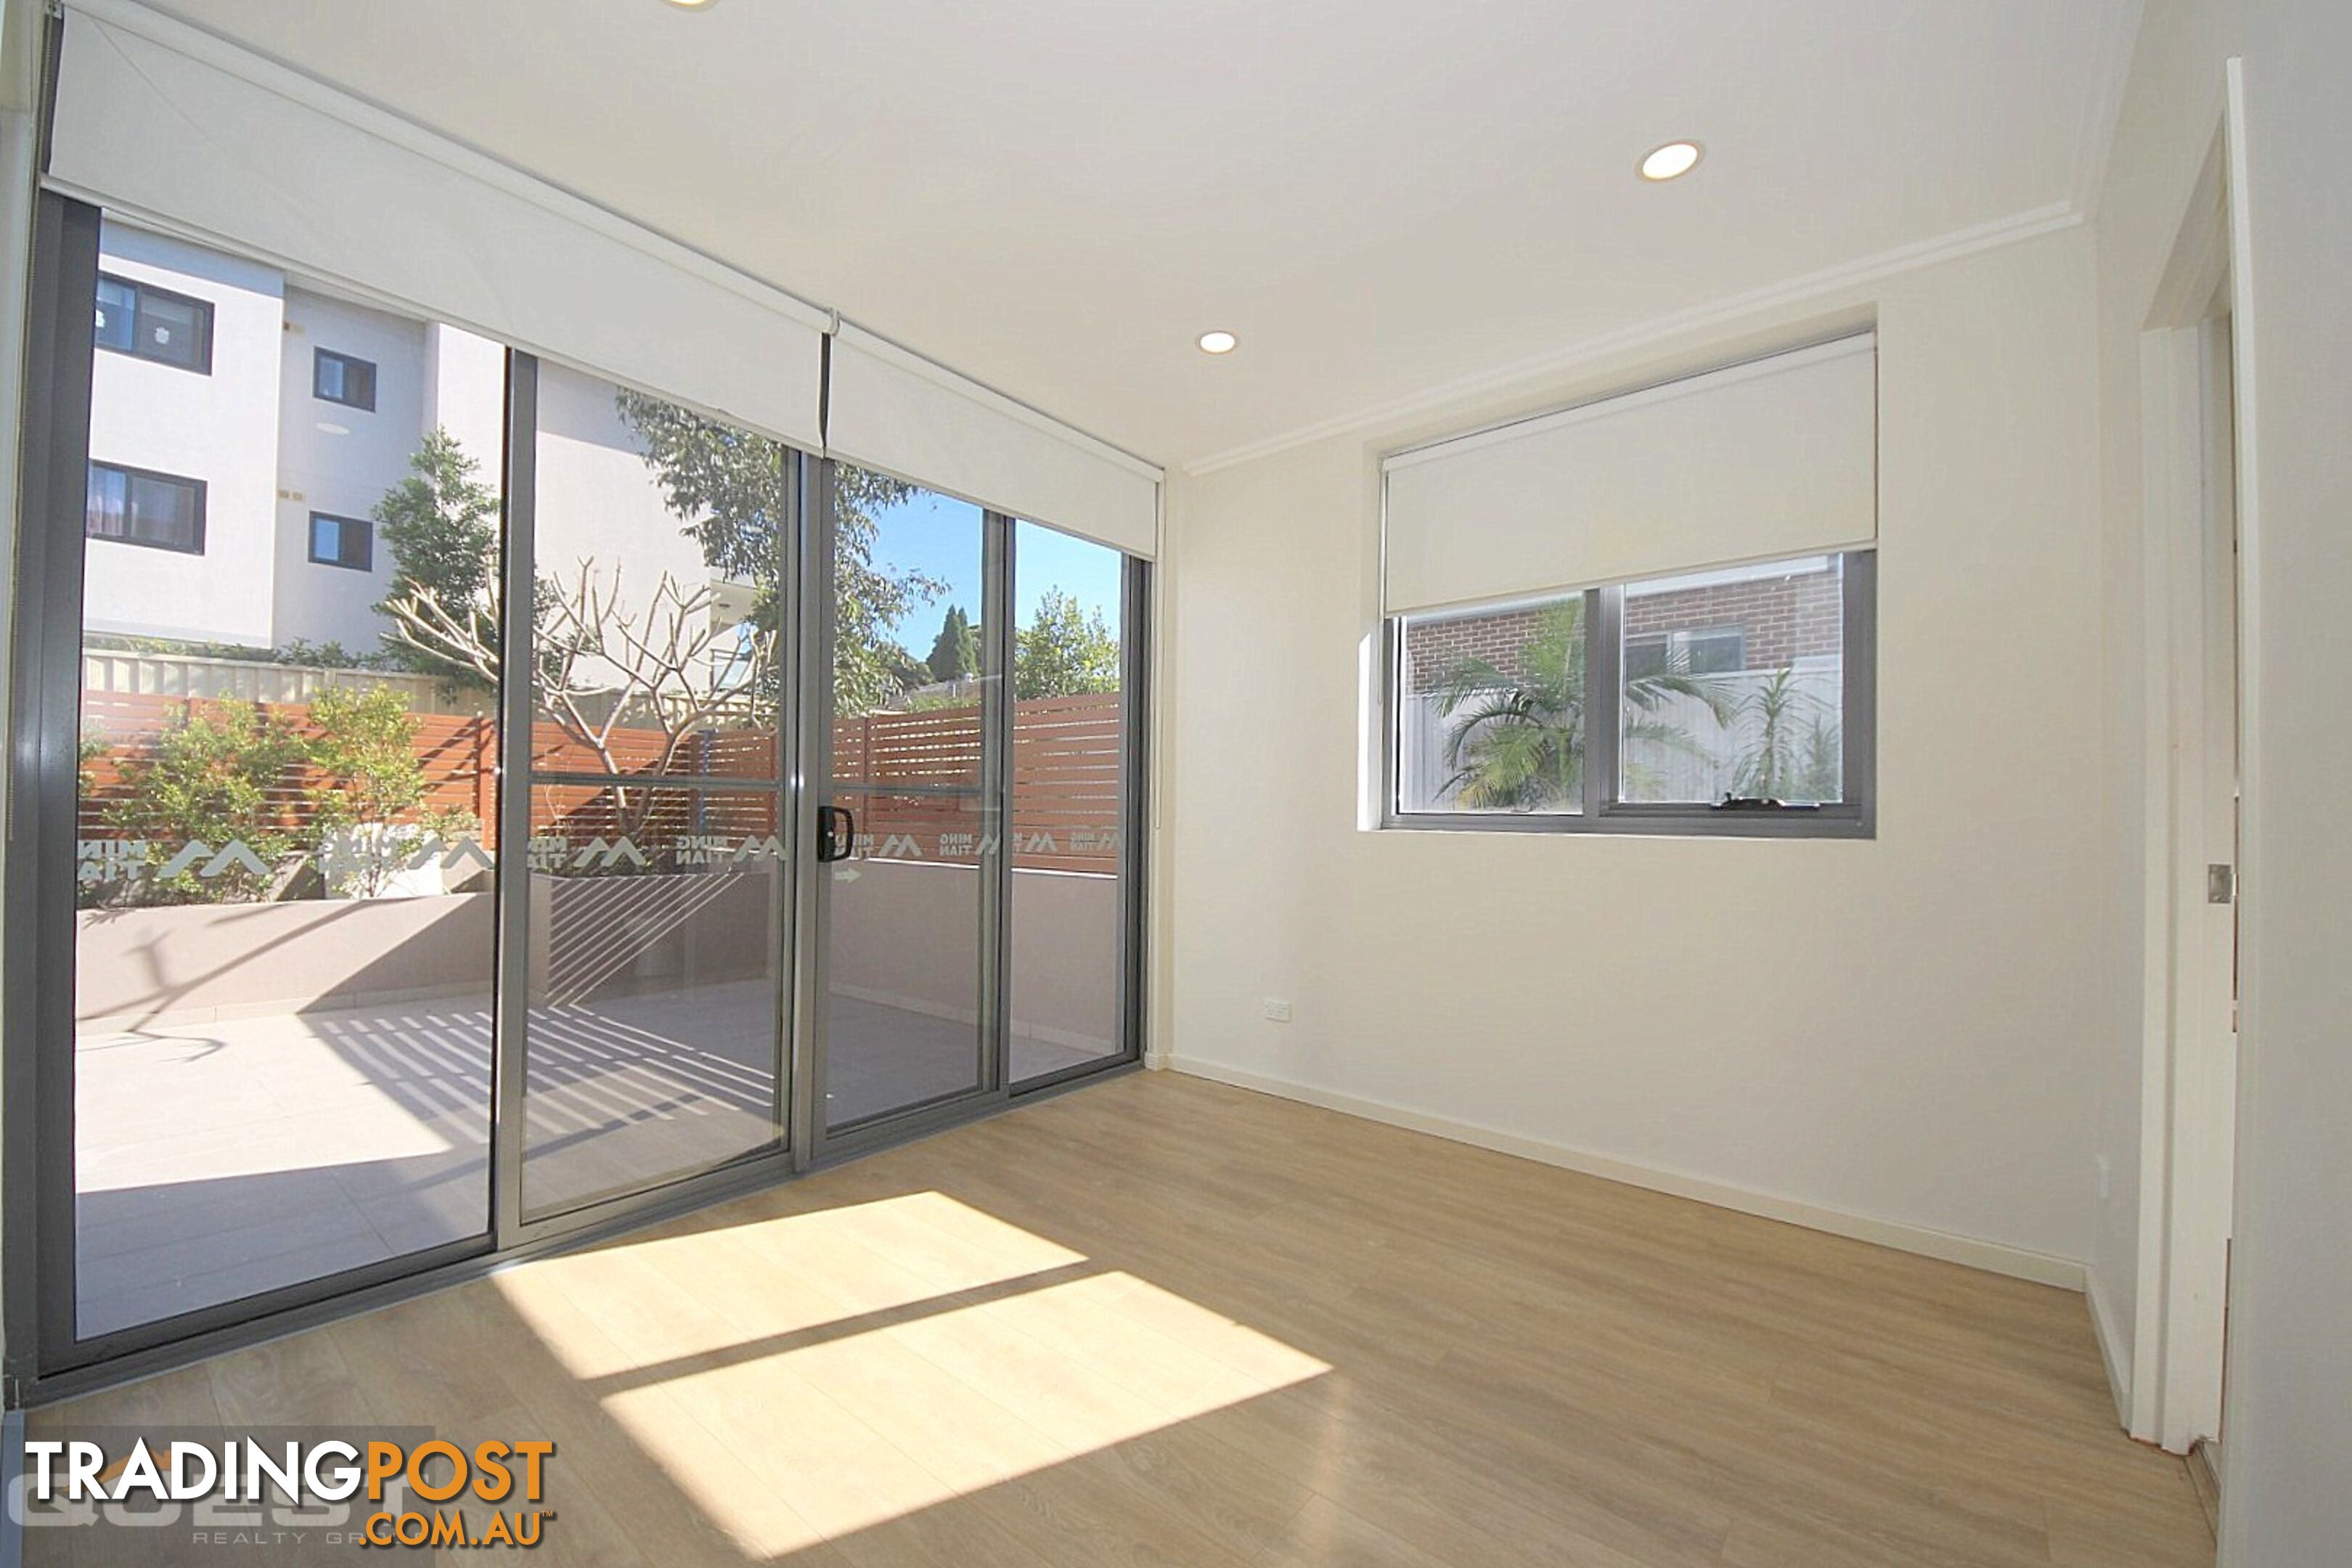 G11/26-36 Cairds Avenue BANKSTOWN NSW 2200